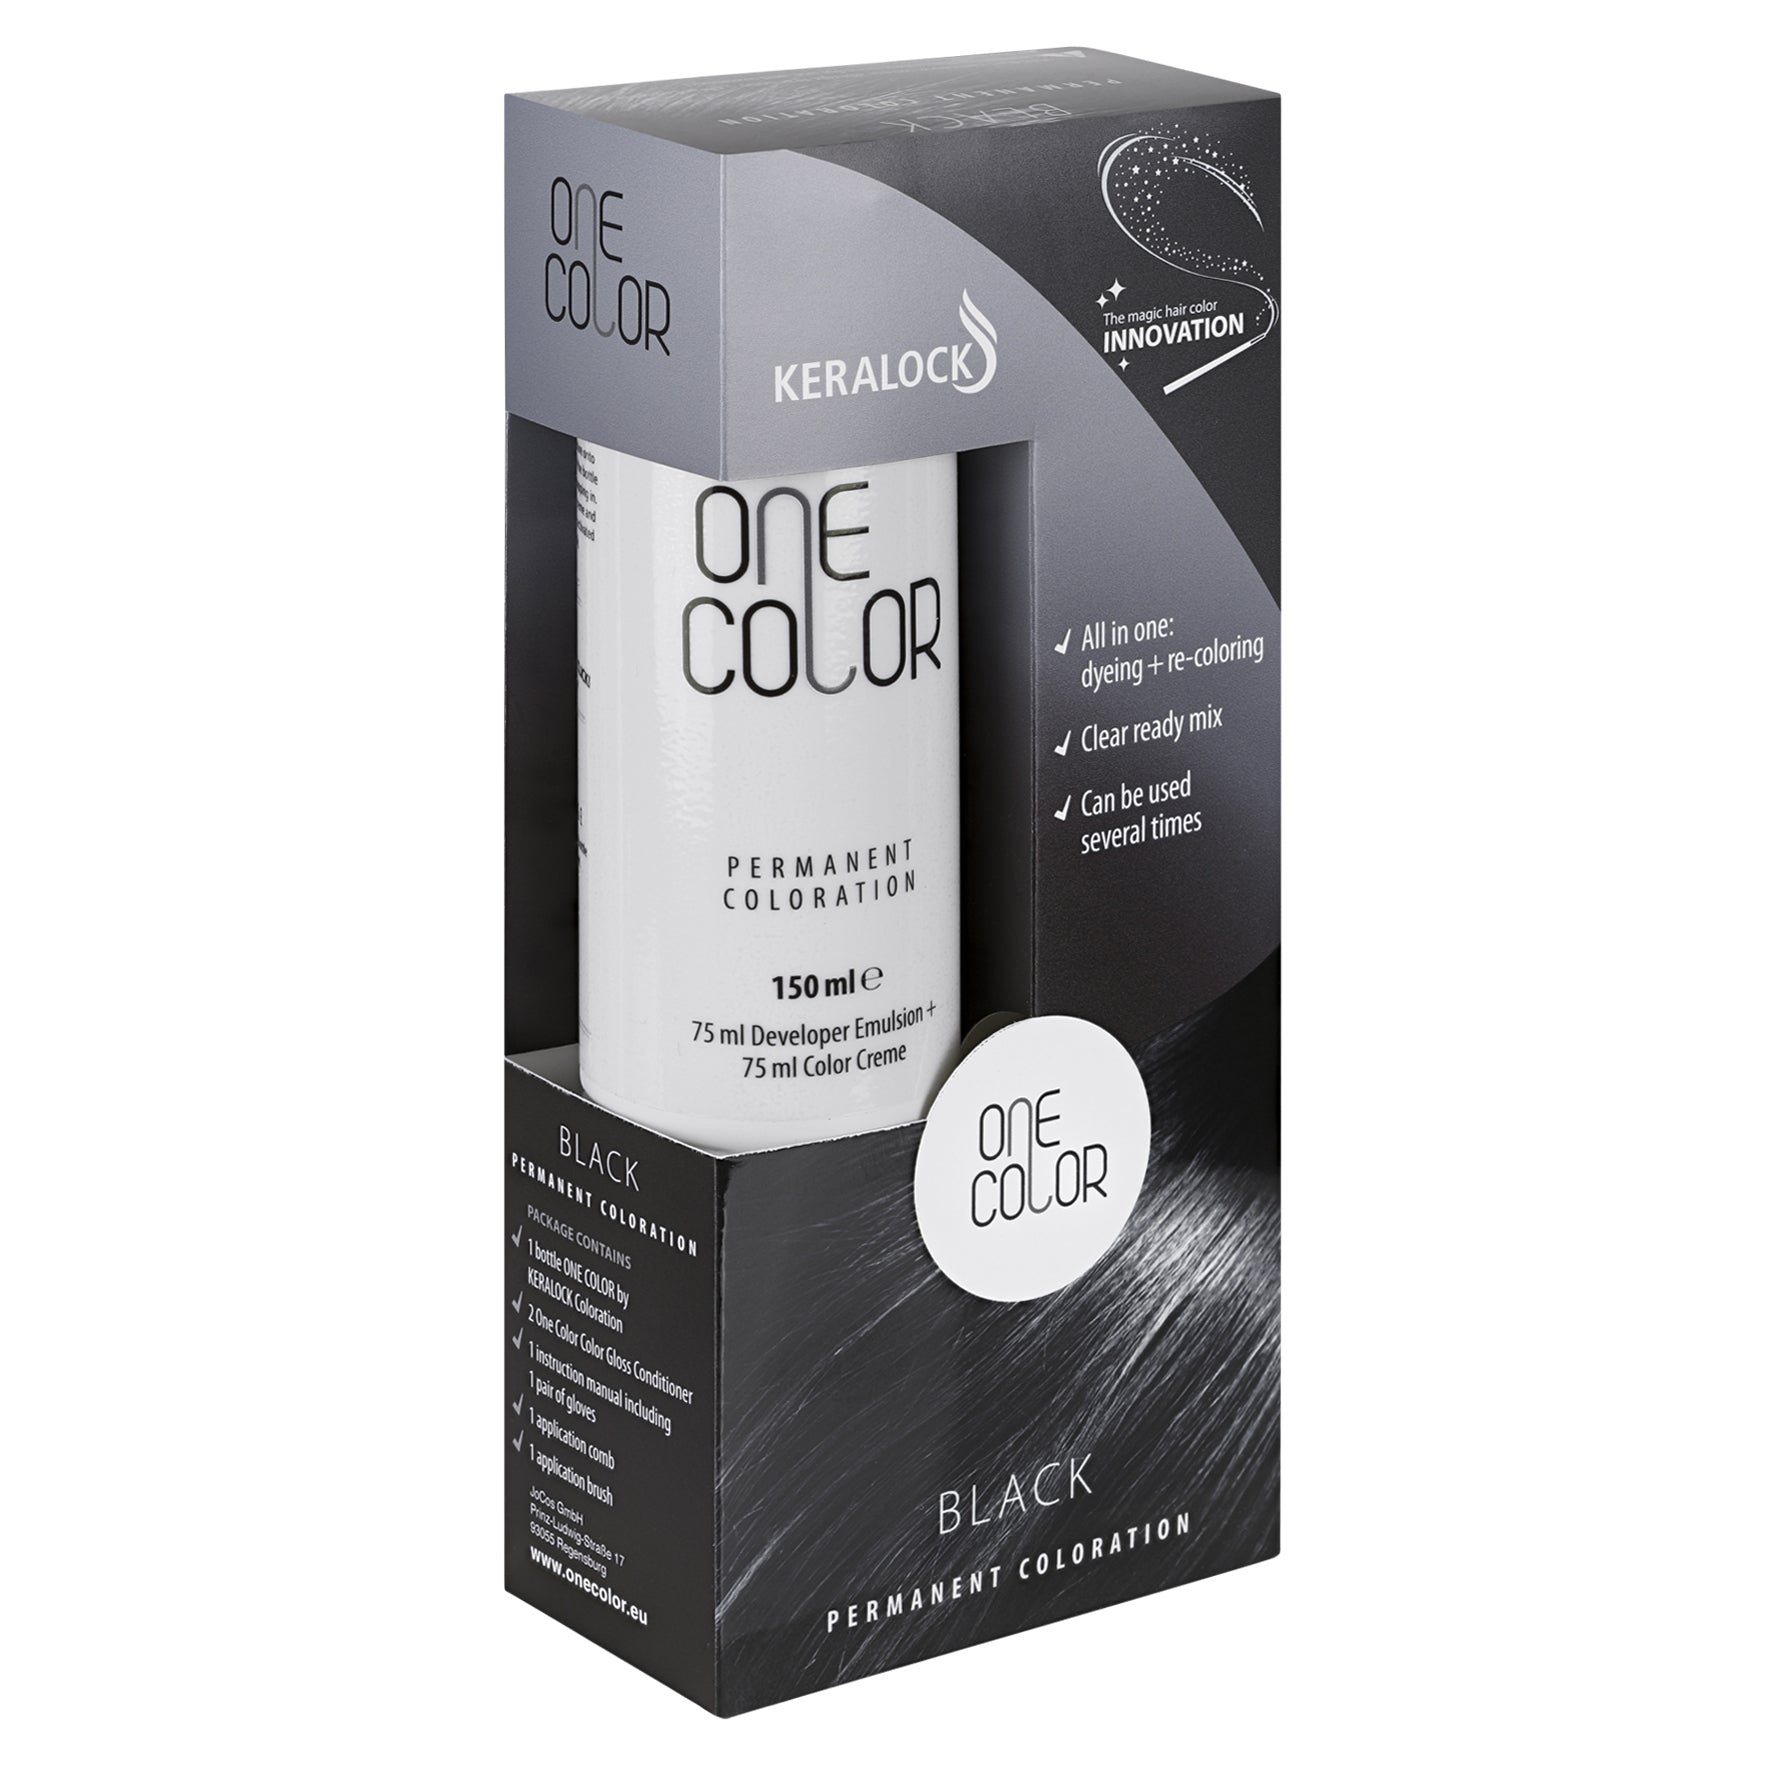 KERALOCK BLACK PERMANENT HAIR COLOR, MADE IN GERMANY